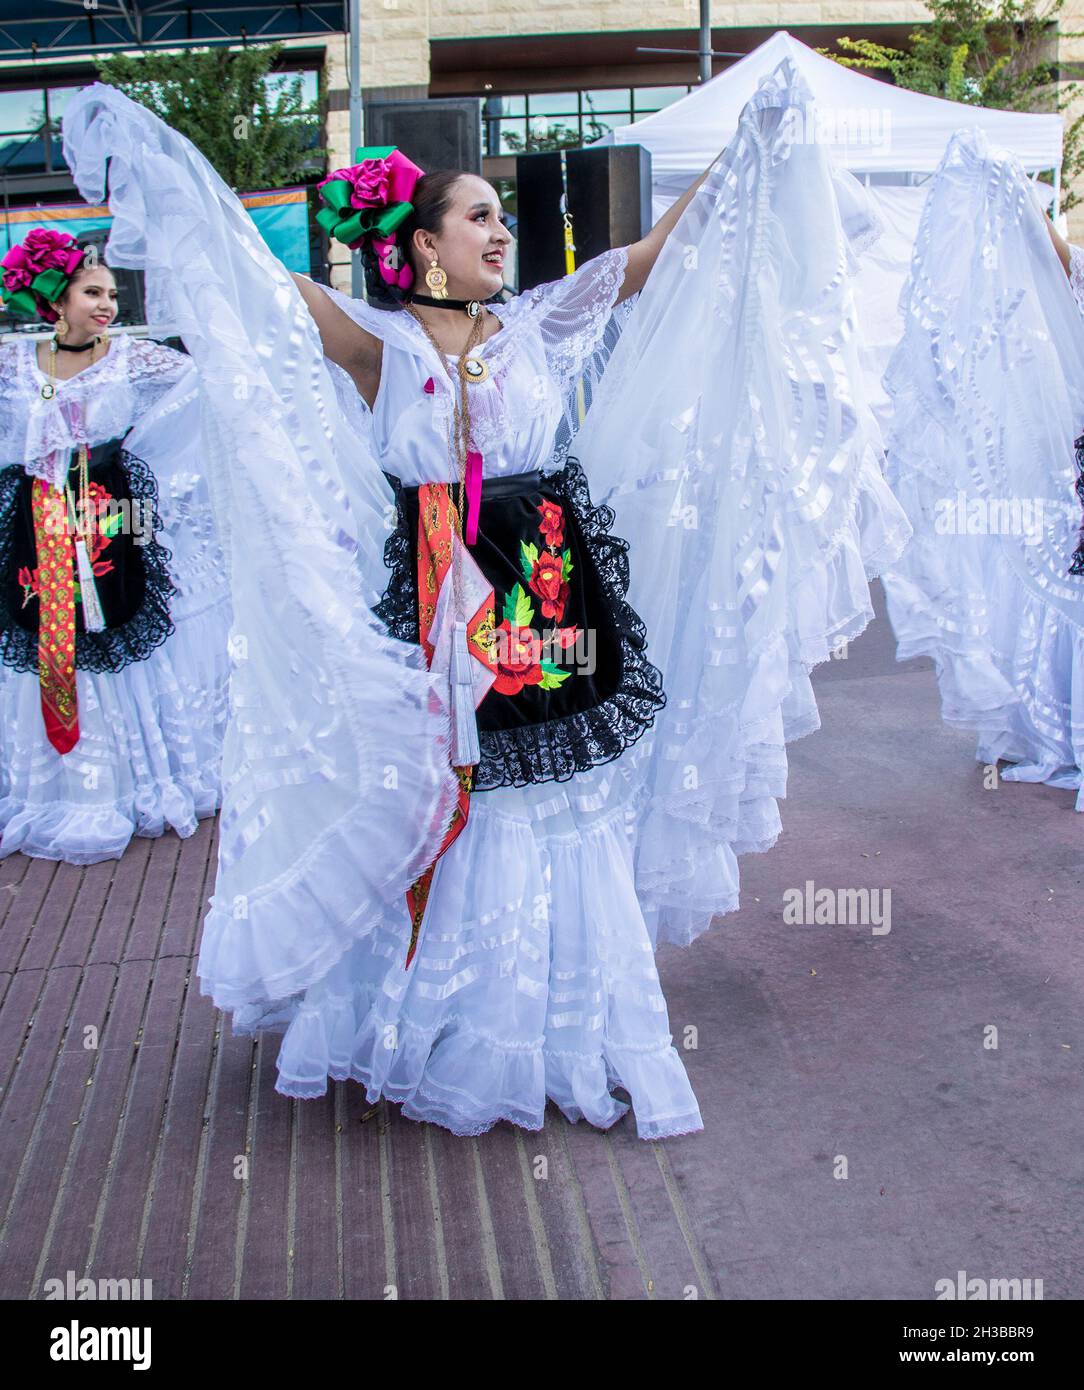 10-09-2021 Tulsa USA -Beautiful young Hispanic dancer holds us the skirts of white lacy skirts of traditional costume while dancing in street.j Stock Photo